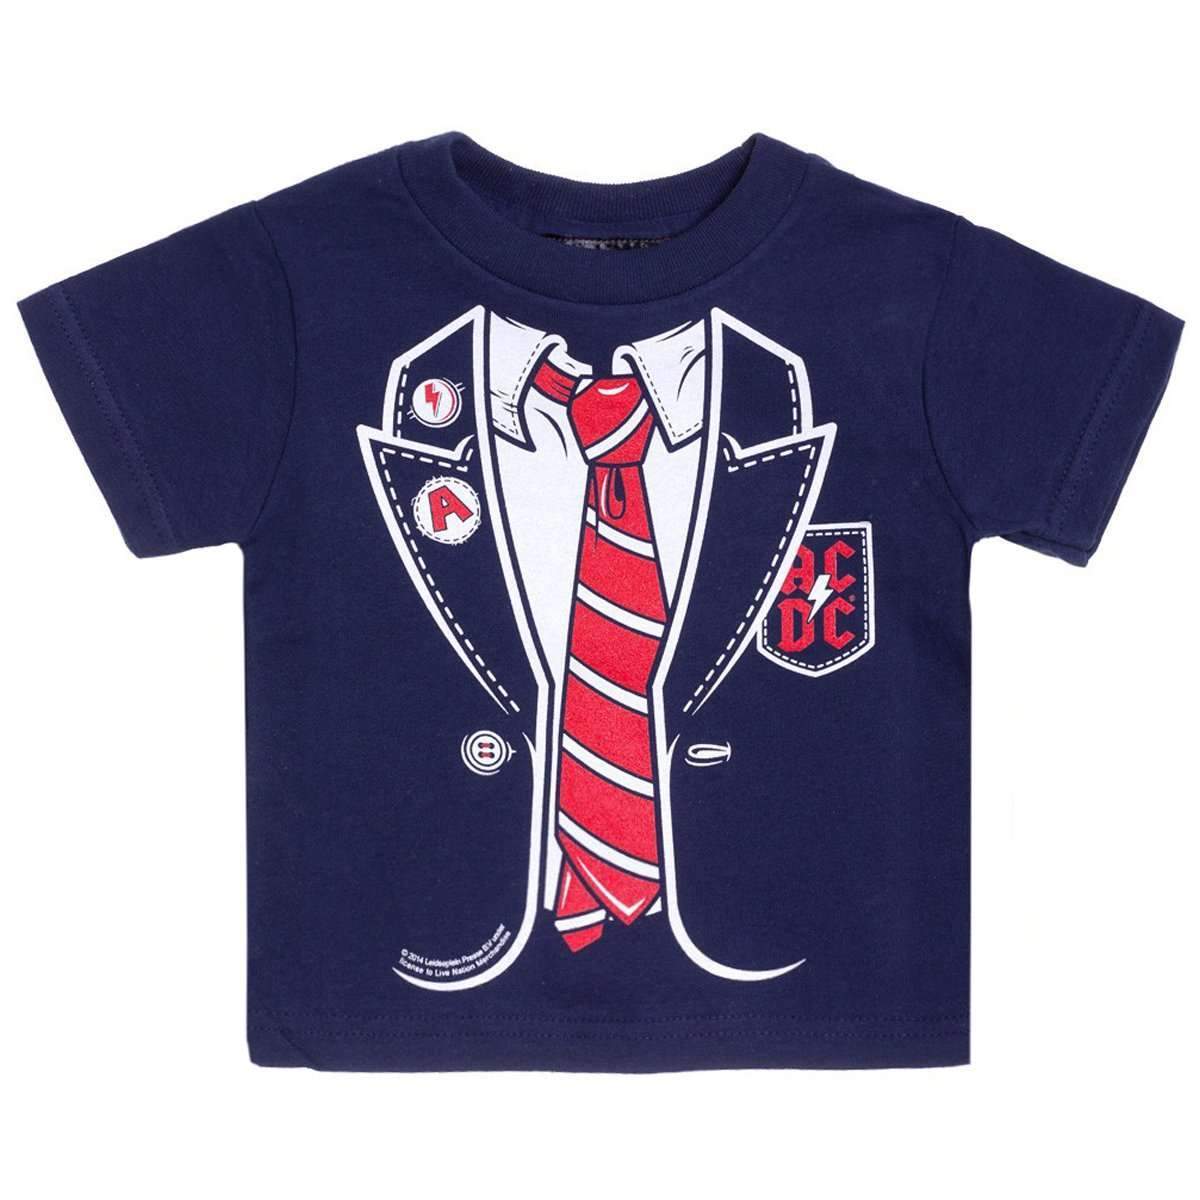 Kids ACDC Angus Young T-Shirt in red white and blue